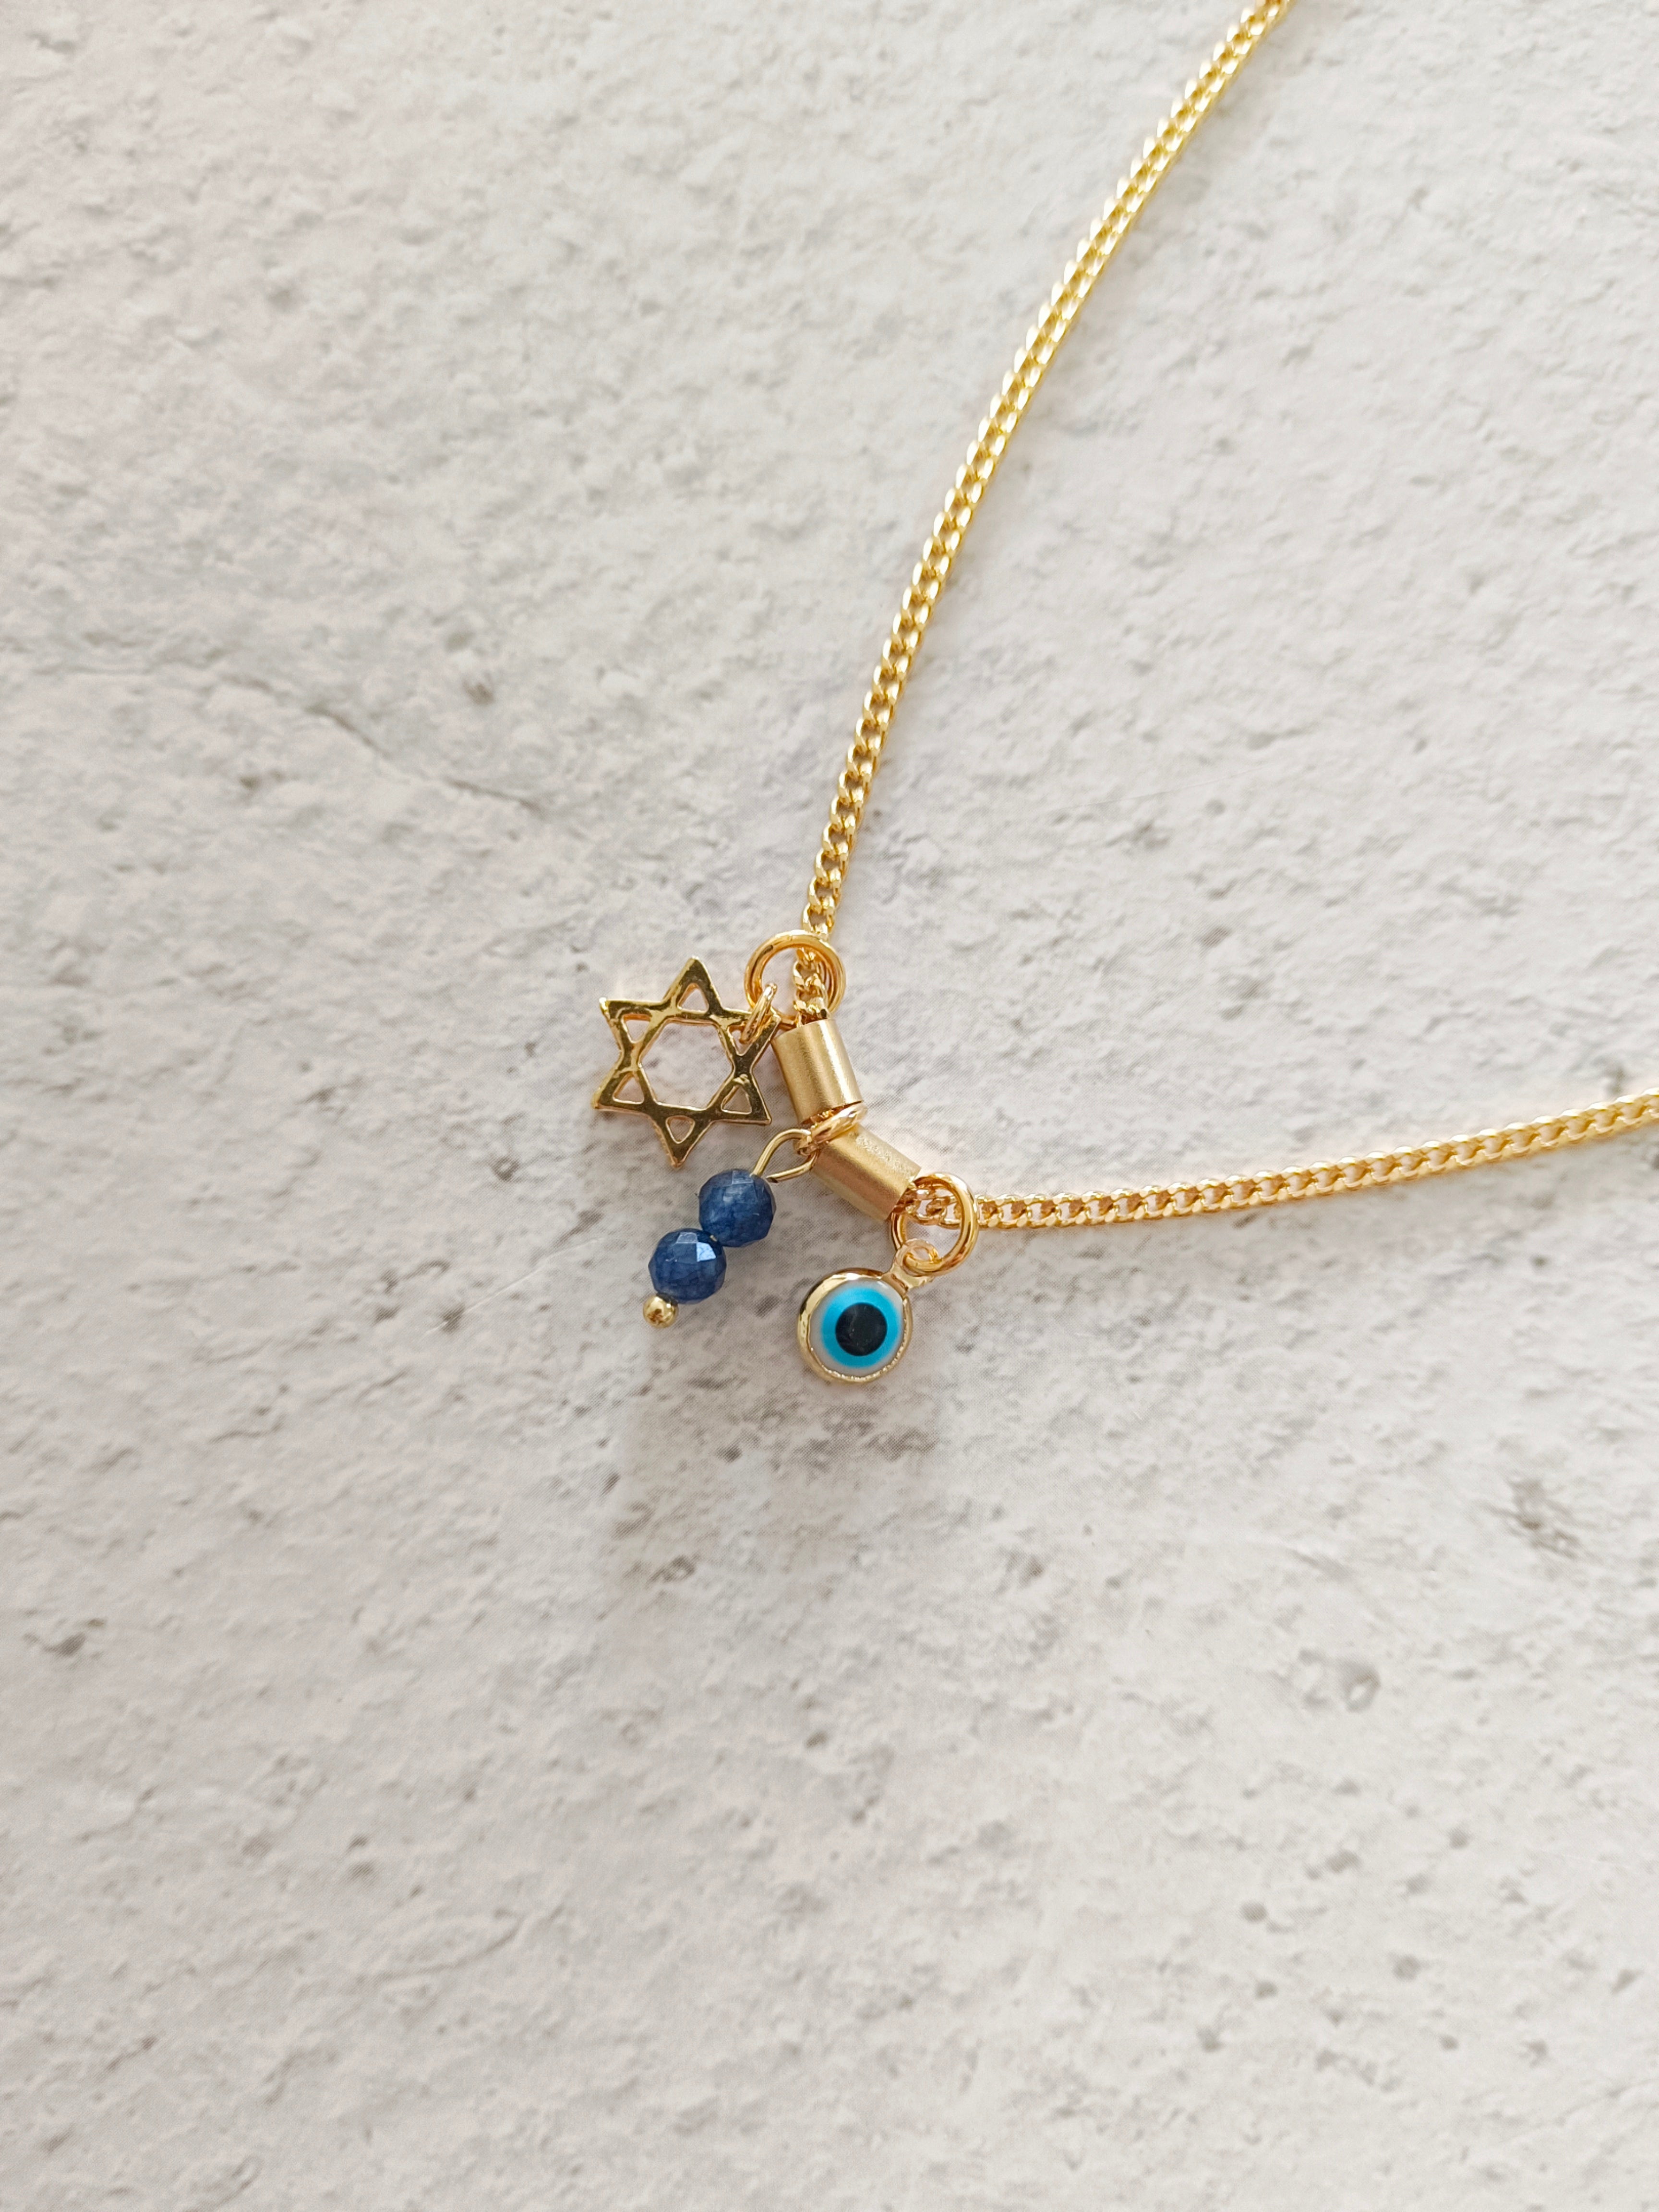 Wake up A gold-plated necklace and various pendants in blue shades